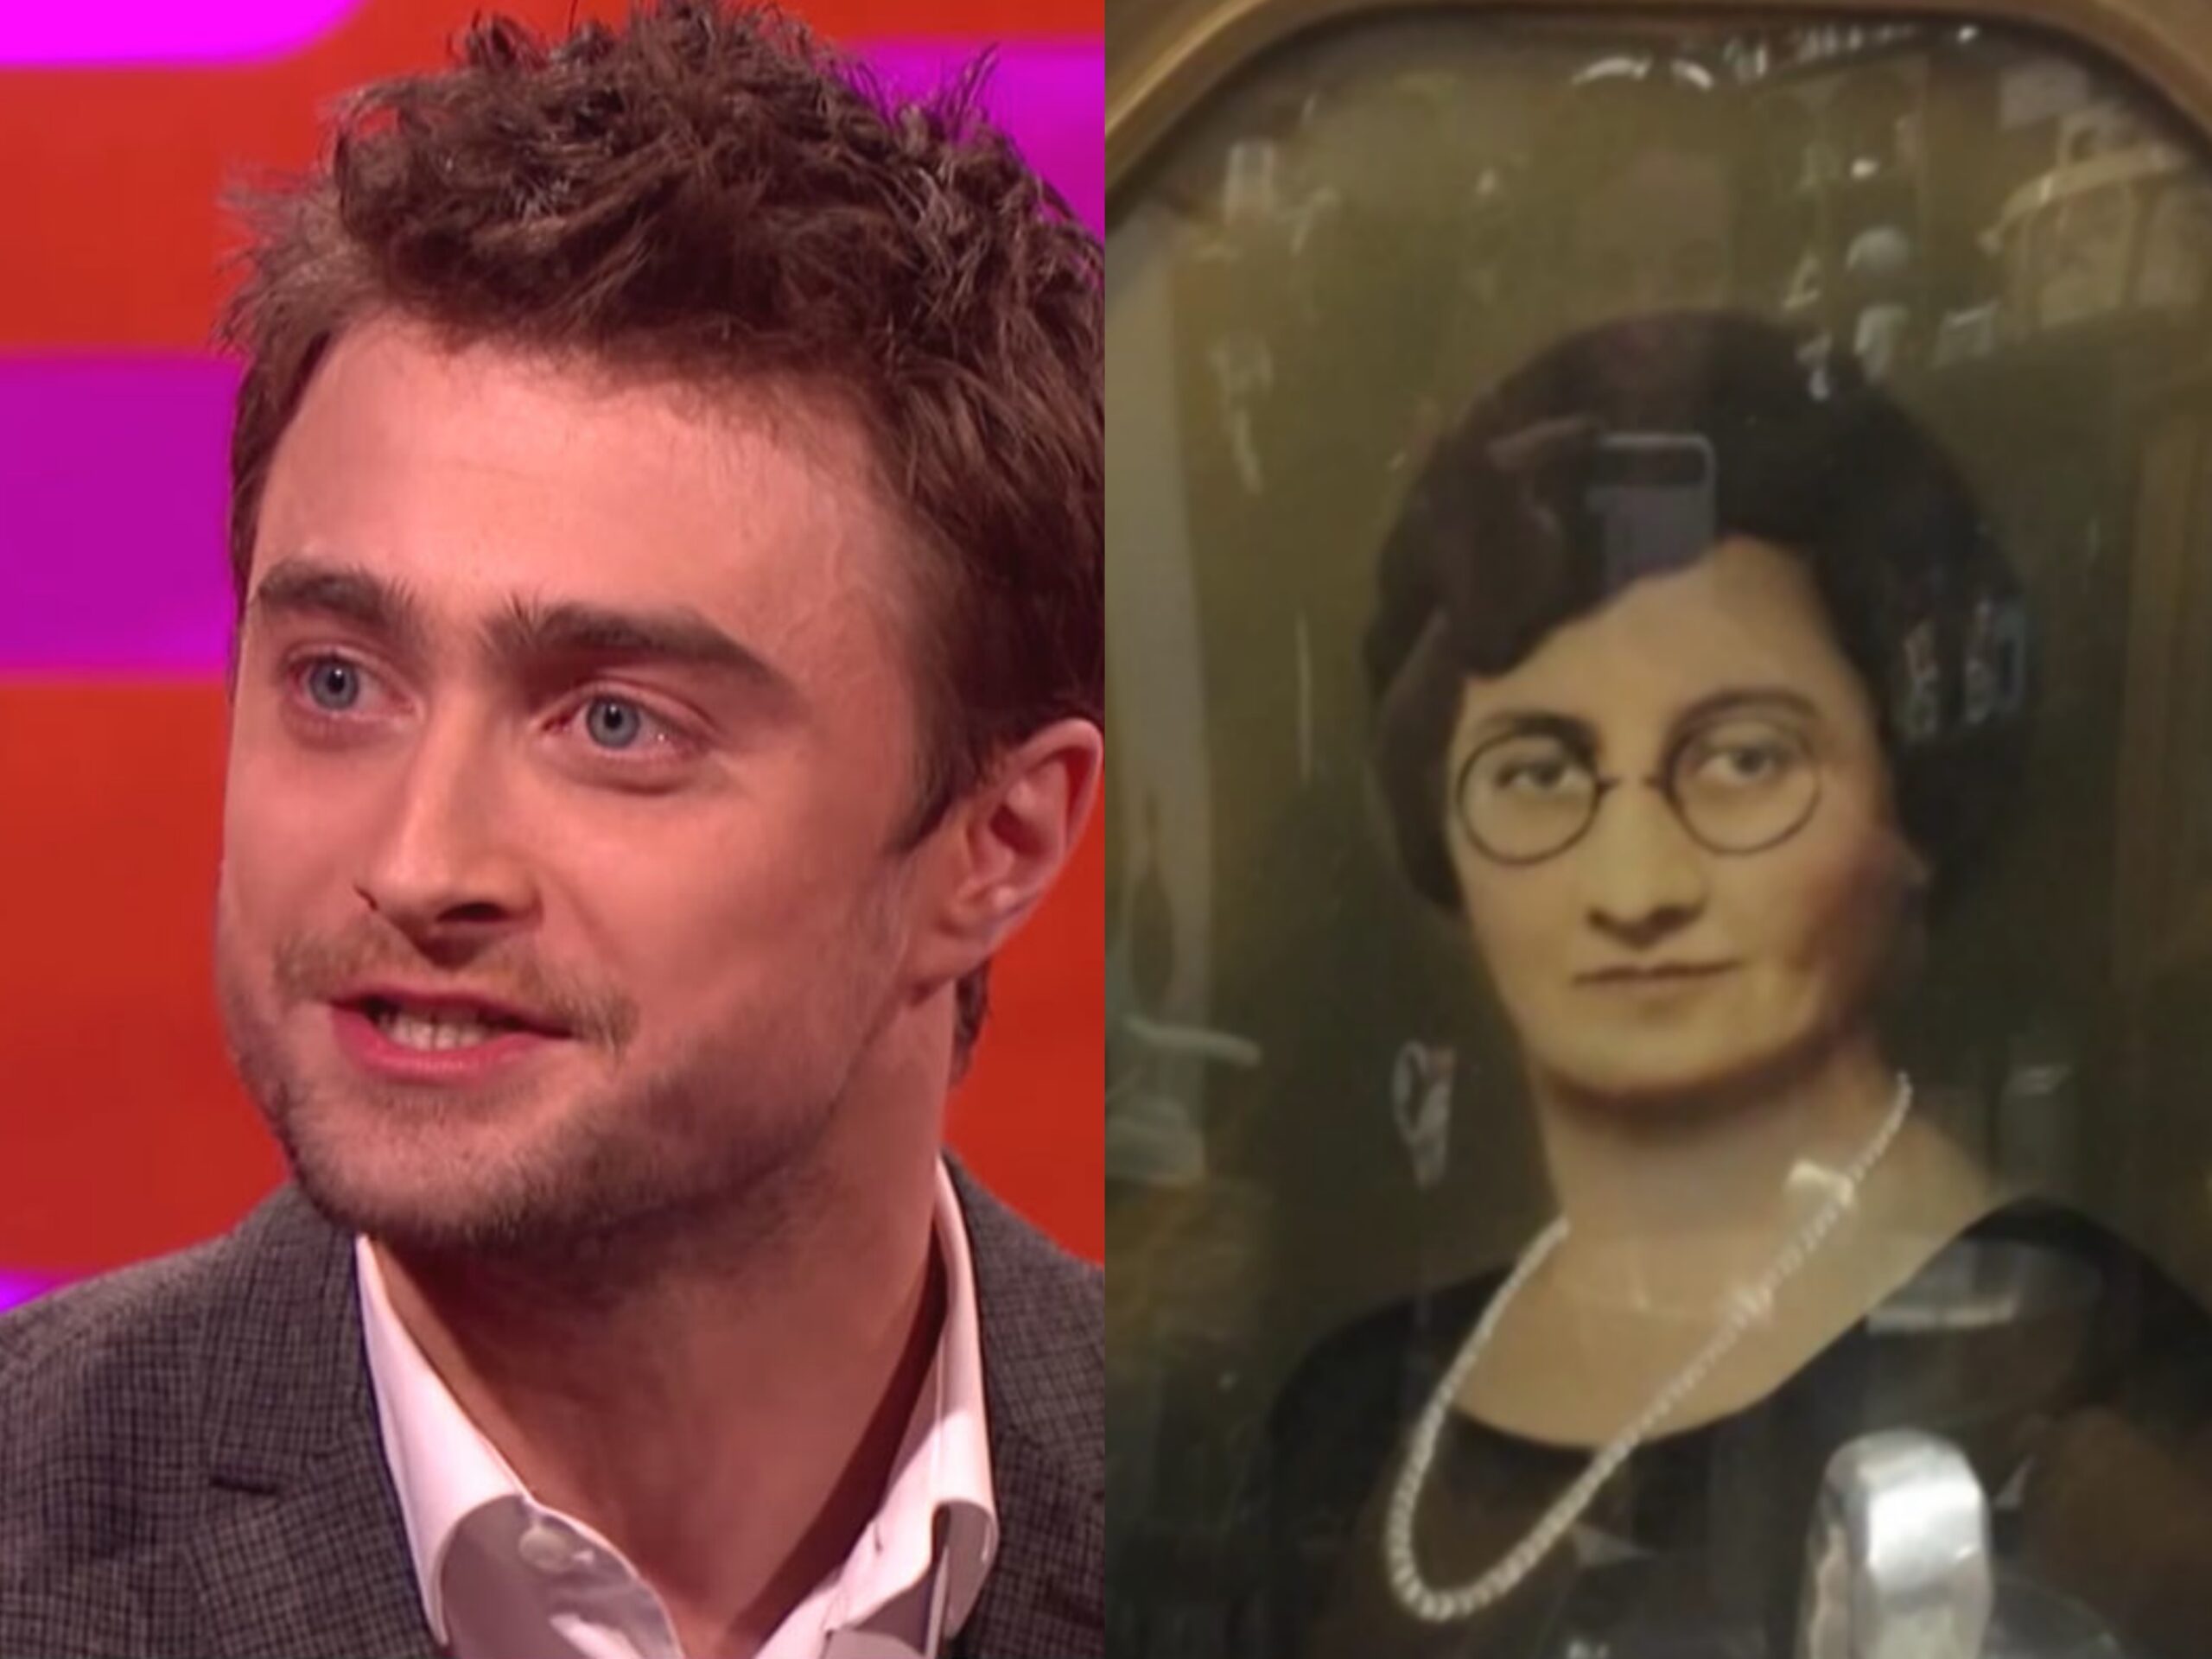 WATCH: Daniel Radcliffe’s doppelgängers from the past